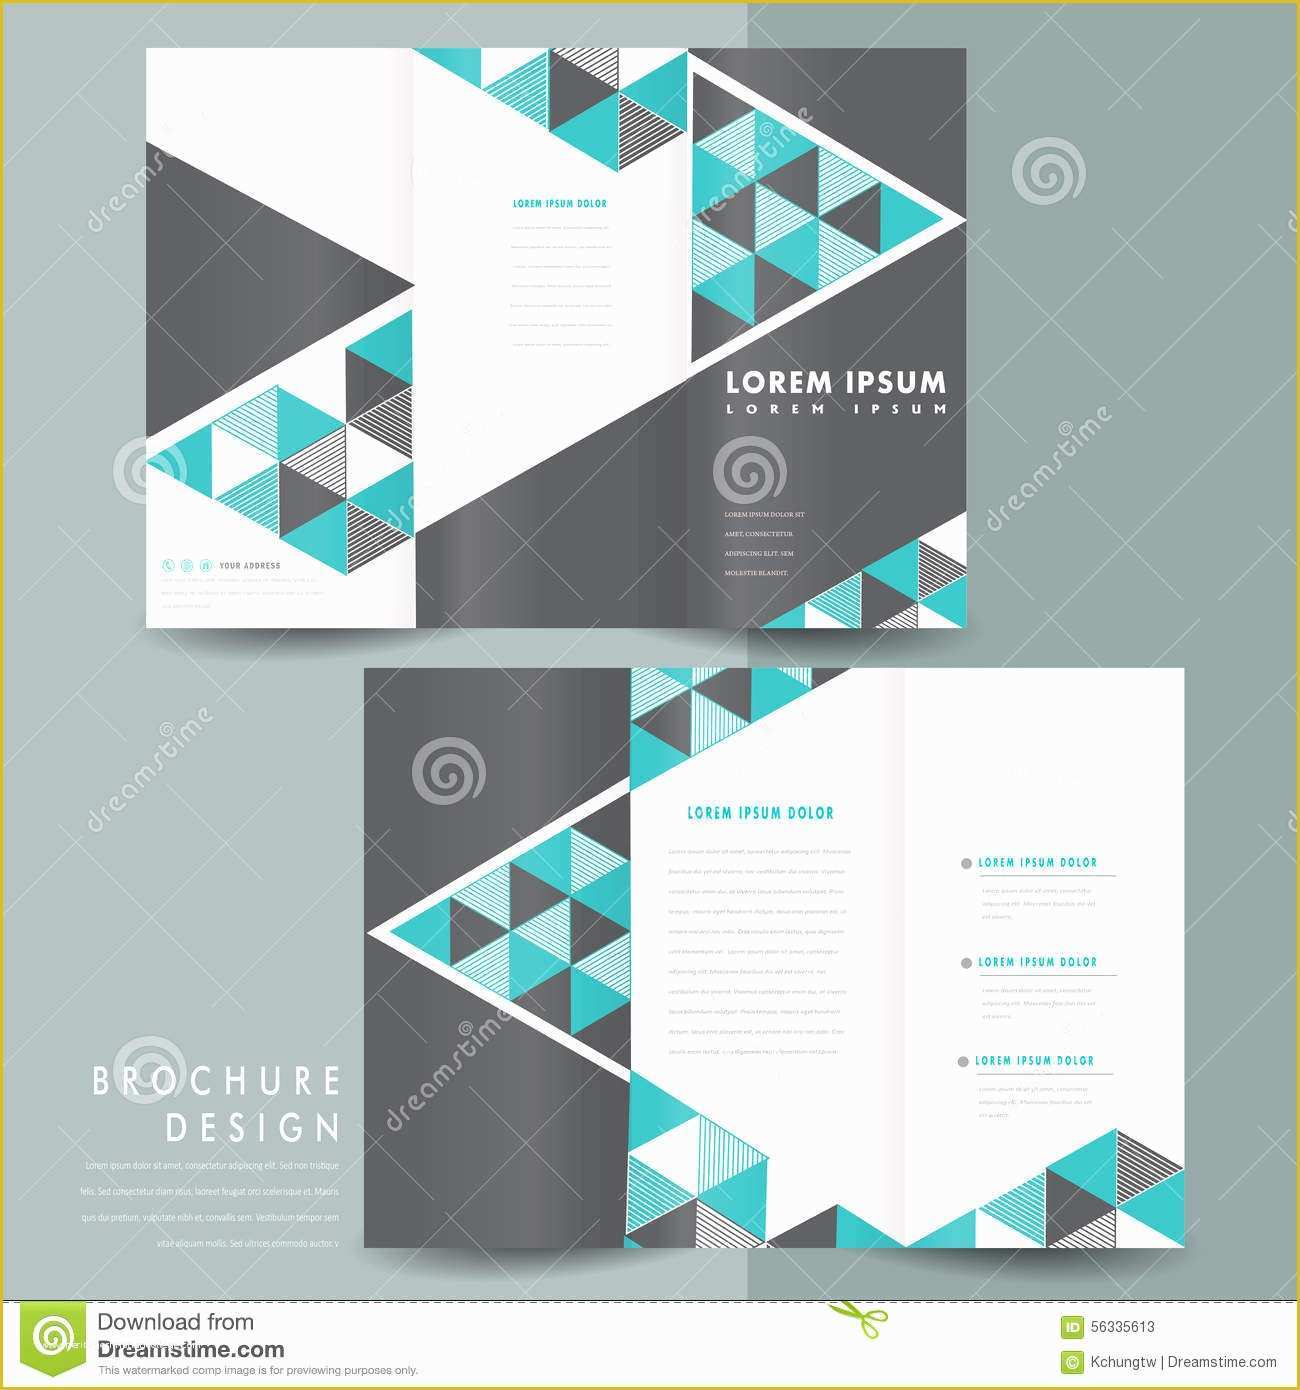 3 Fold Brochure Template Free Download Of 3 Fold Brochure Design Templates Reeviewer